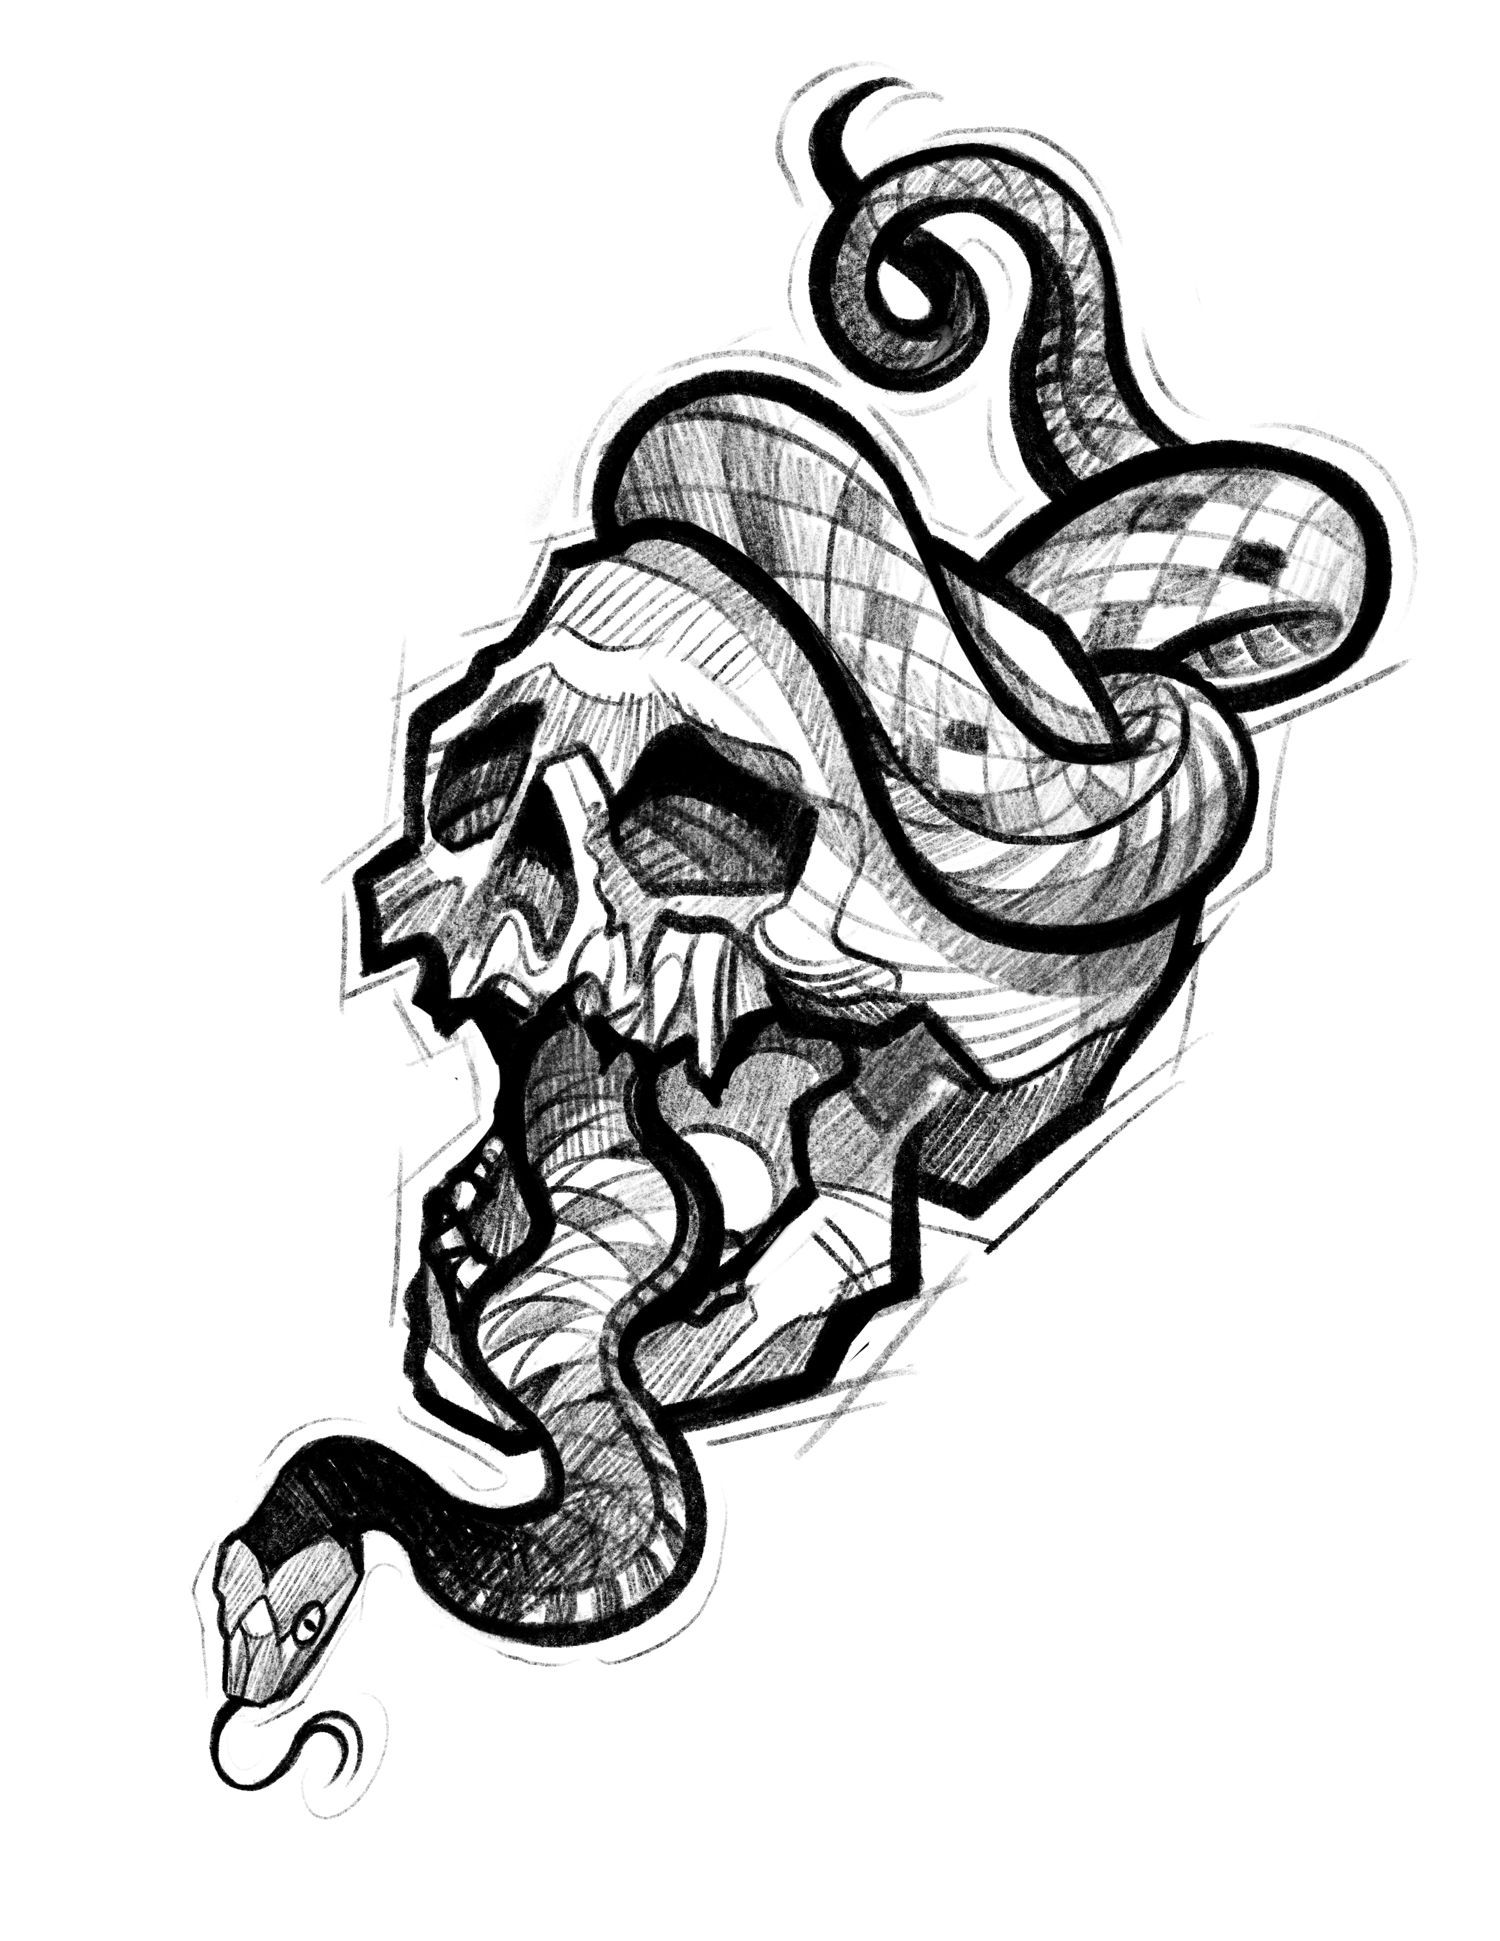 Snake Skull (sketch style) - $150 flat rate special